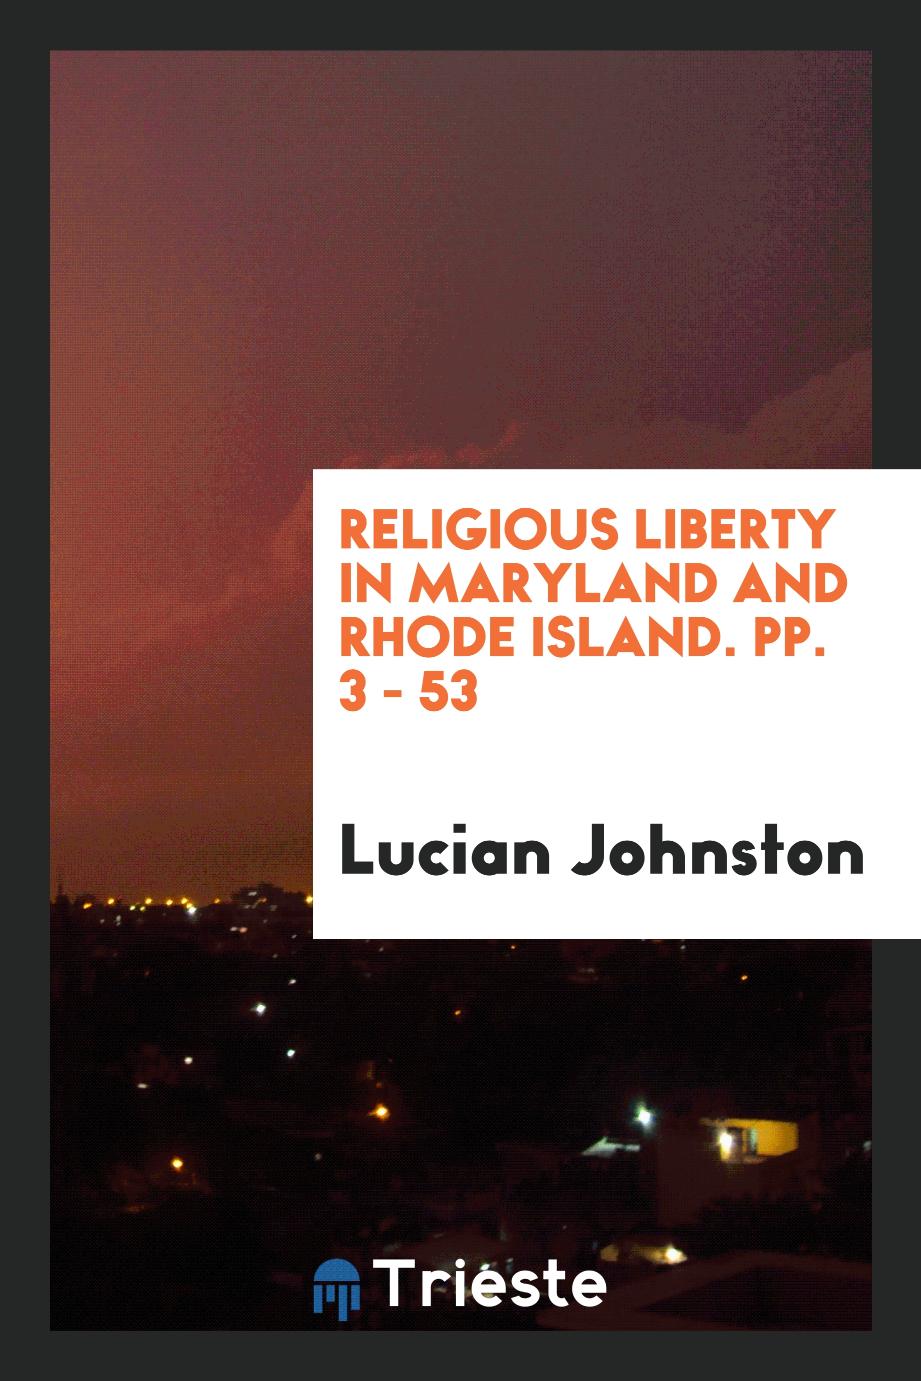 Religious Liberty in Maryland and Rhode Island. pp. 3 - 53